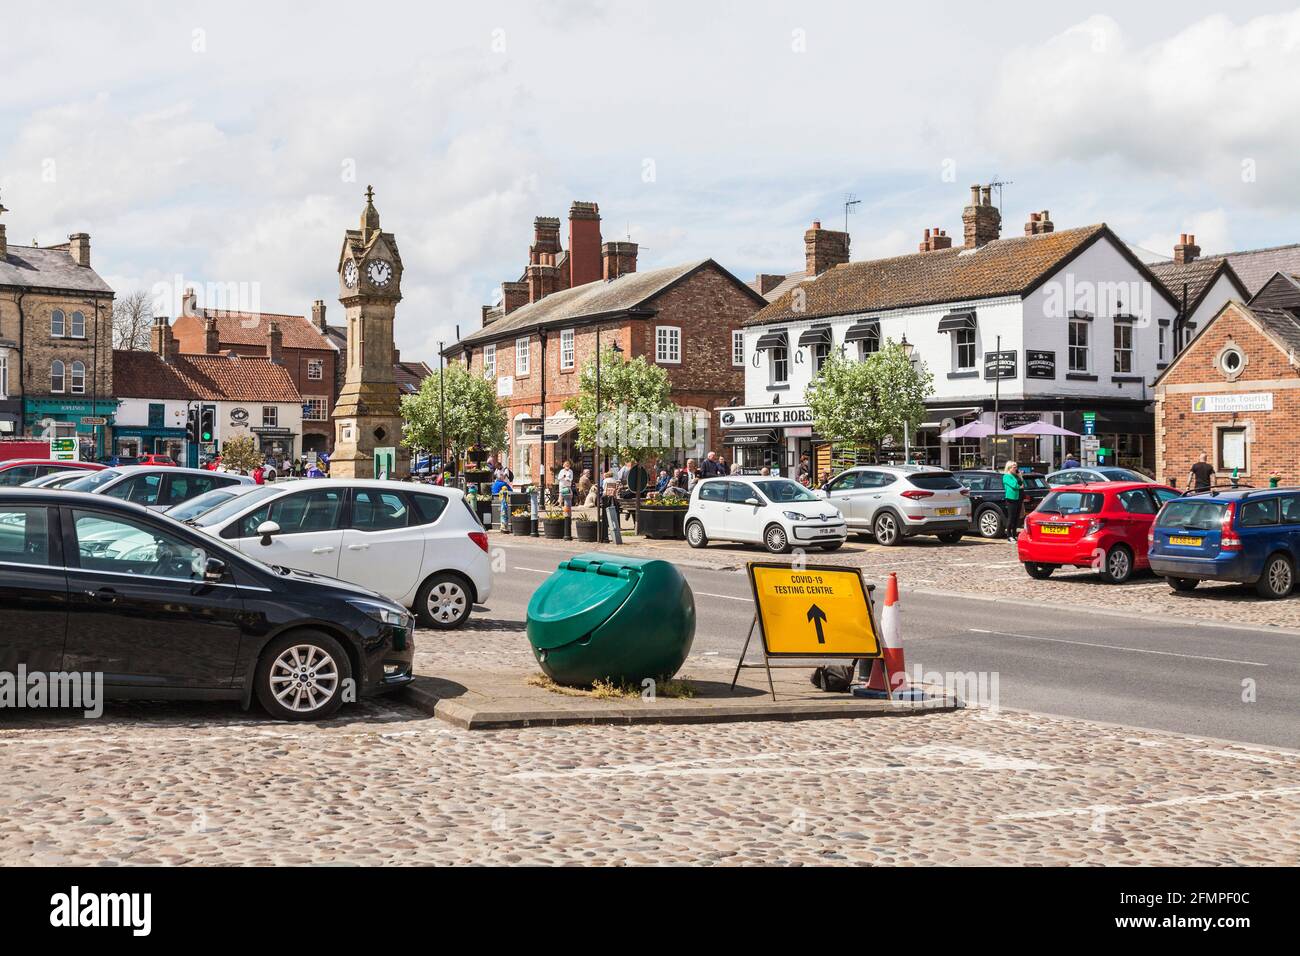 The market place in Thirsk,North Yorkshire,England,UK Stock Photo